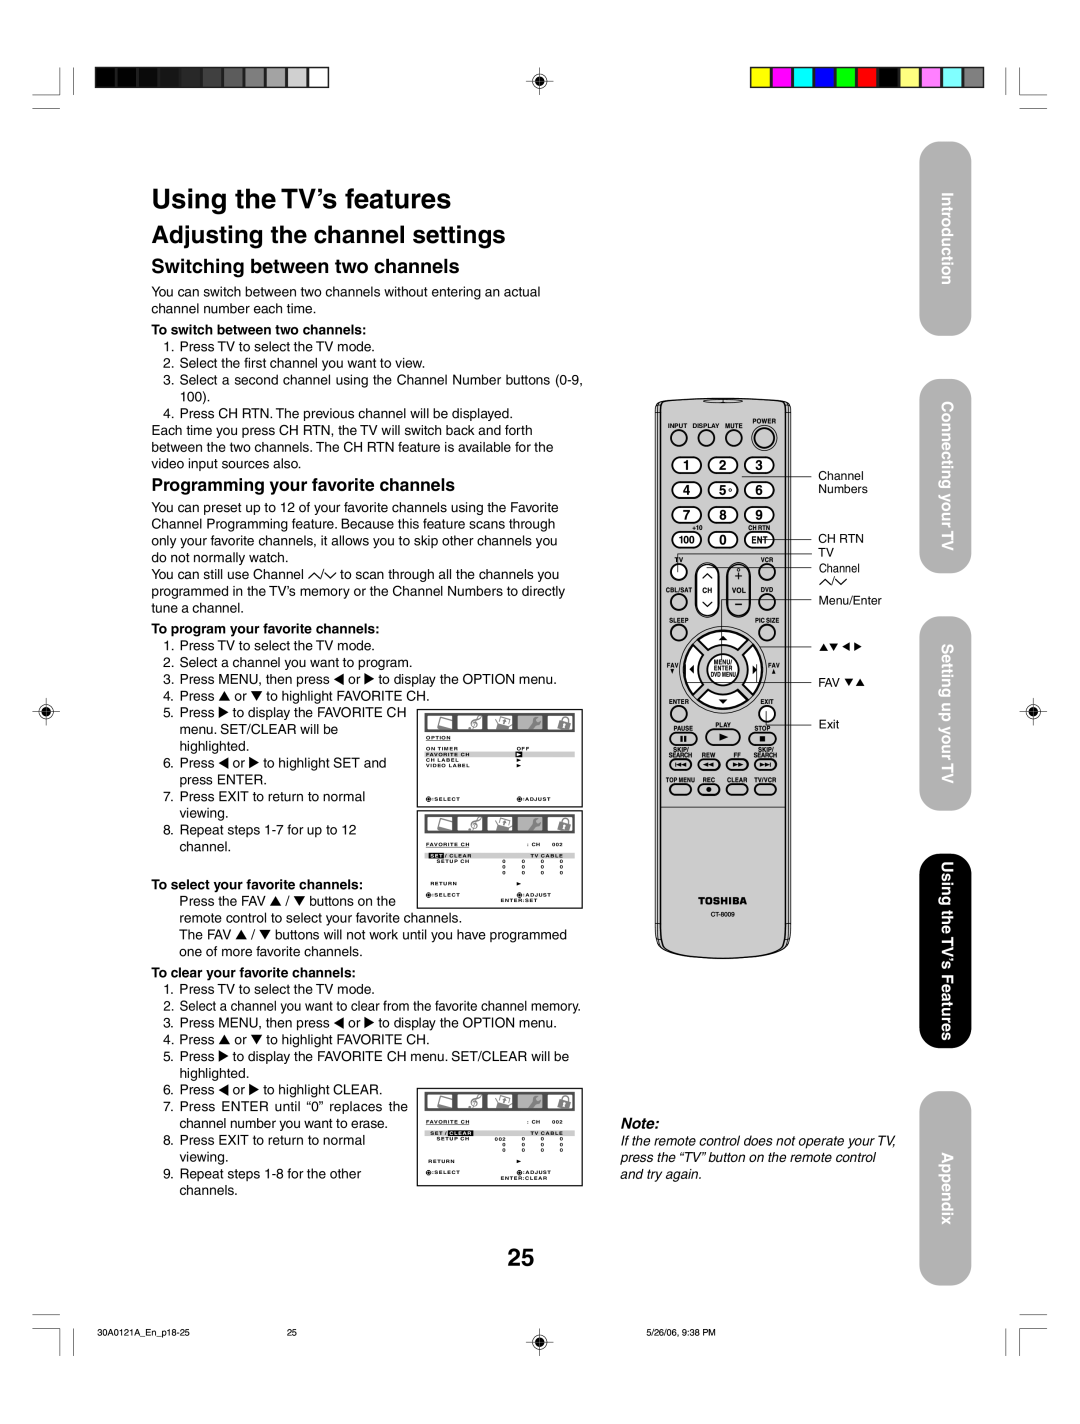 Toshiba 50HP86 Introduction Connecting your TV Setting up your TV, Using the TV’s Features Appendix, viewing, channels 